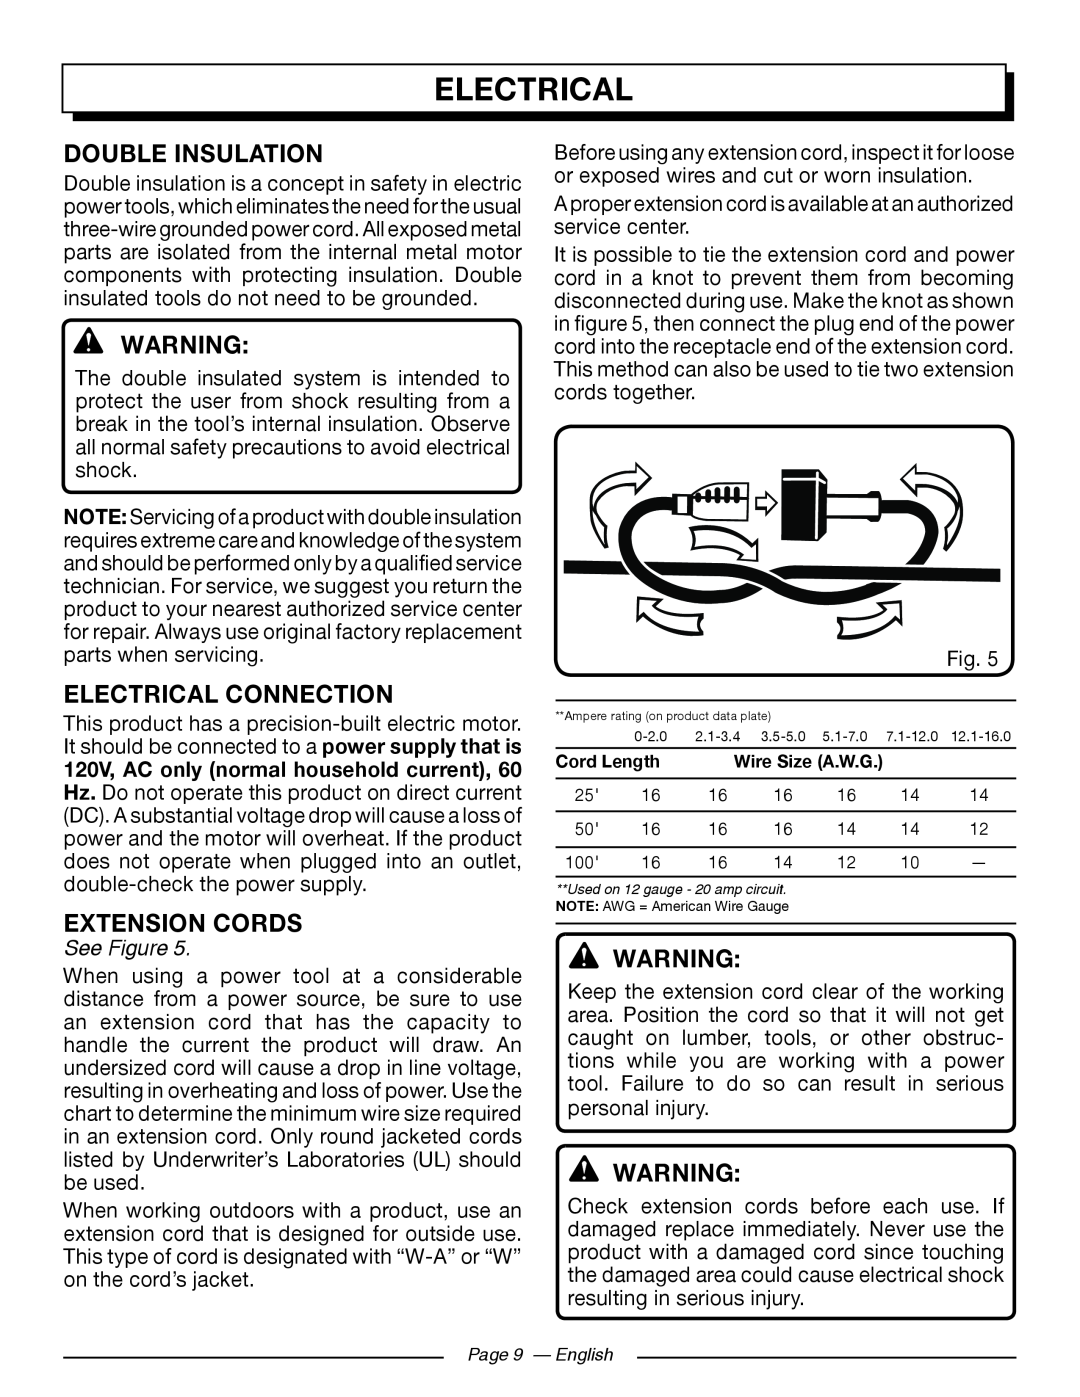 Homelite UT43102, UT43122 Featureselectrical, Double Insulation, Electrical Connection, Extension Cords, See Figure 